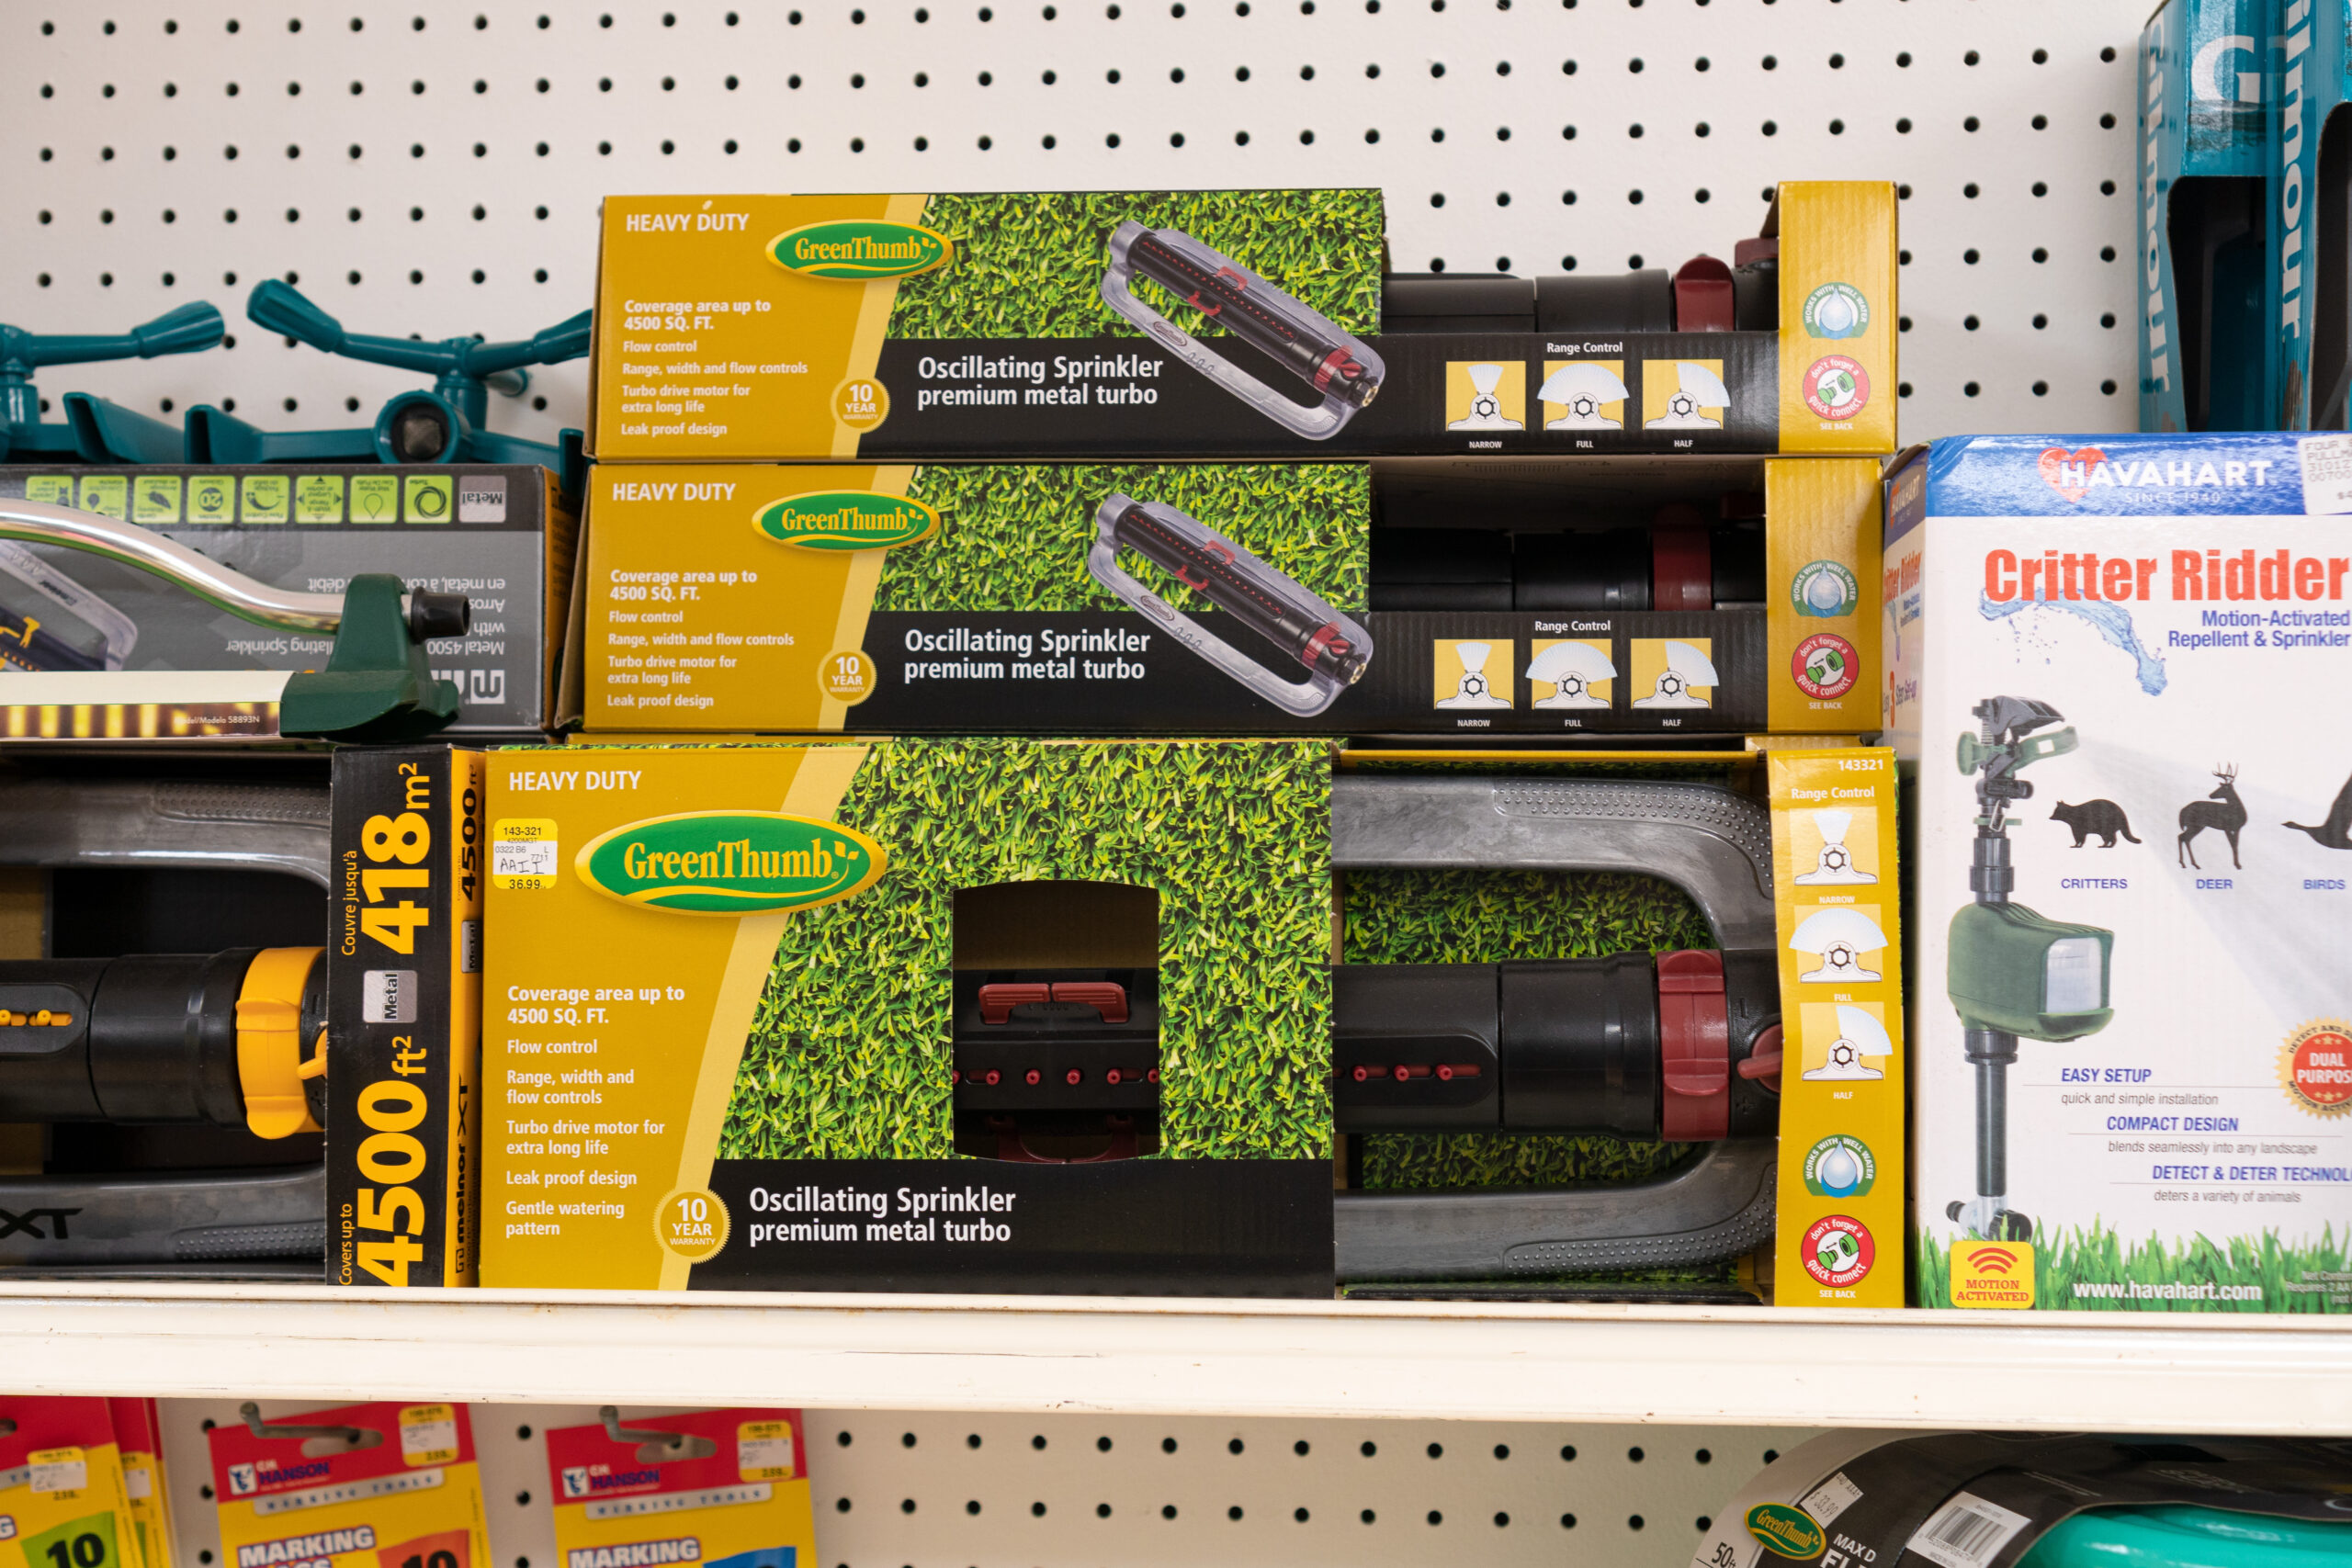 A shelf containing several boxes with Green Thumb brand Oscillating Sprinklers